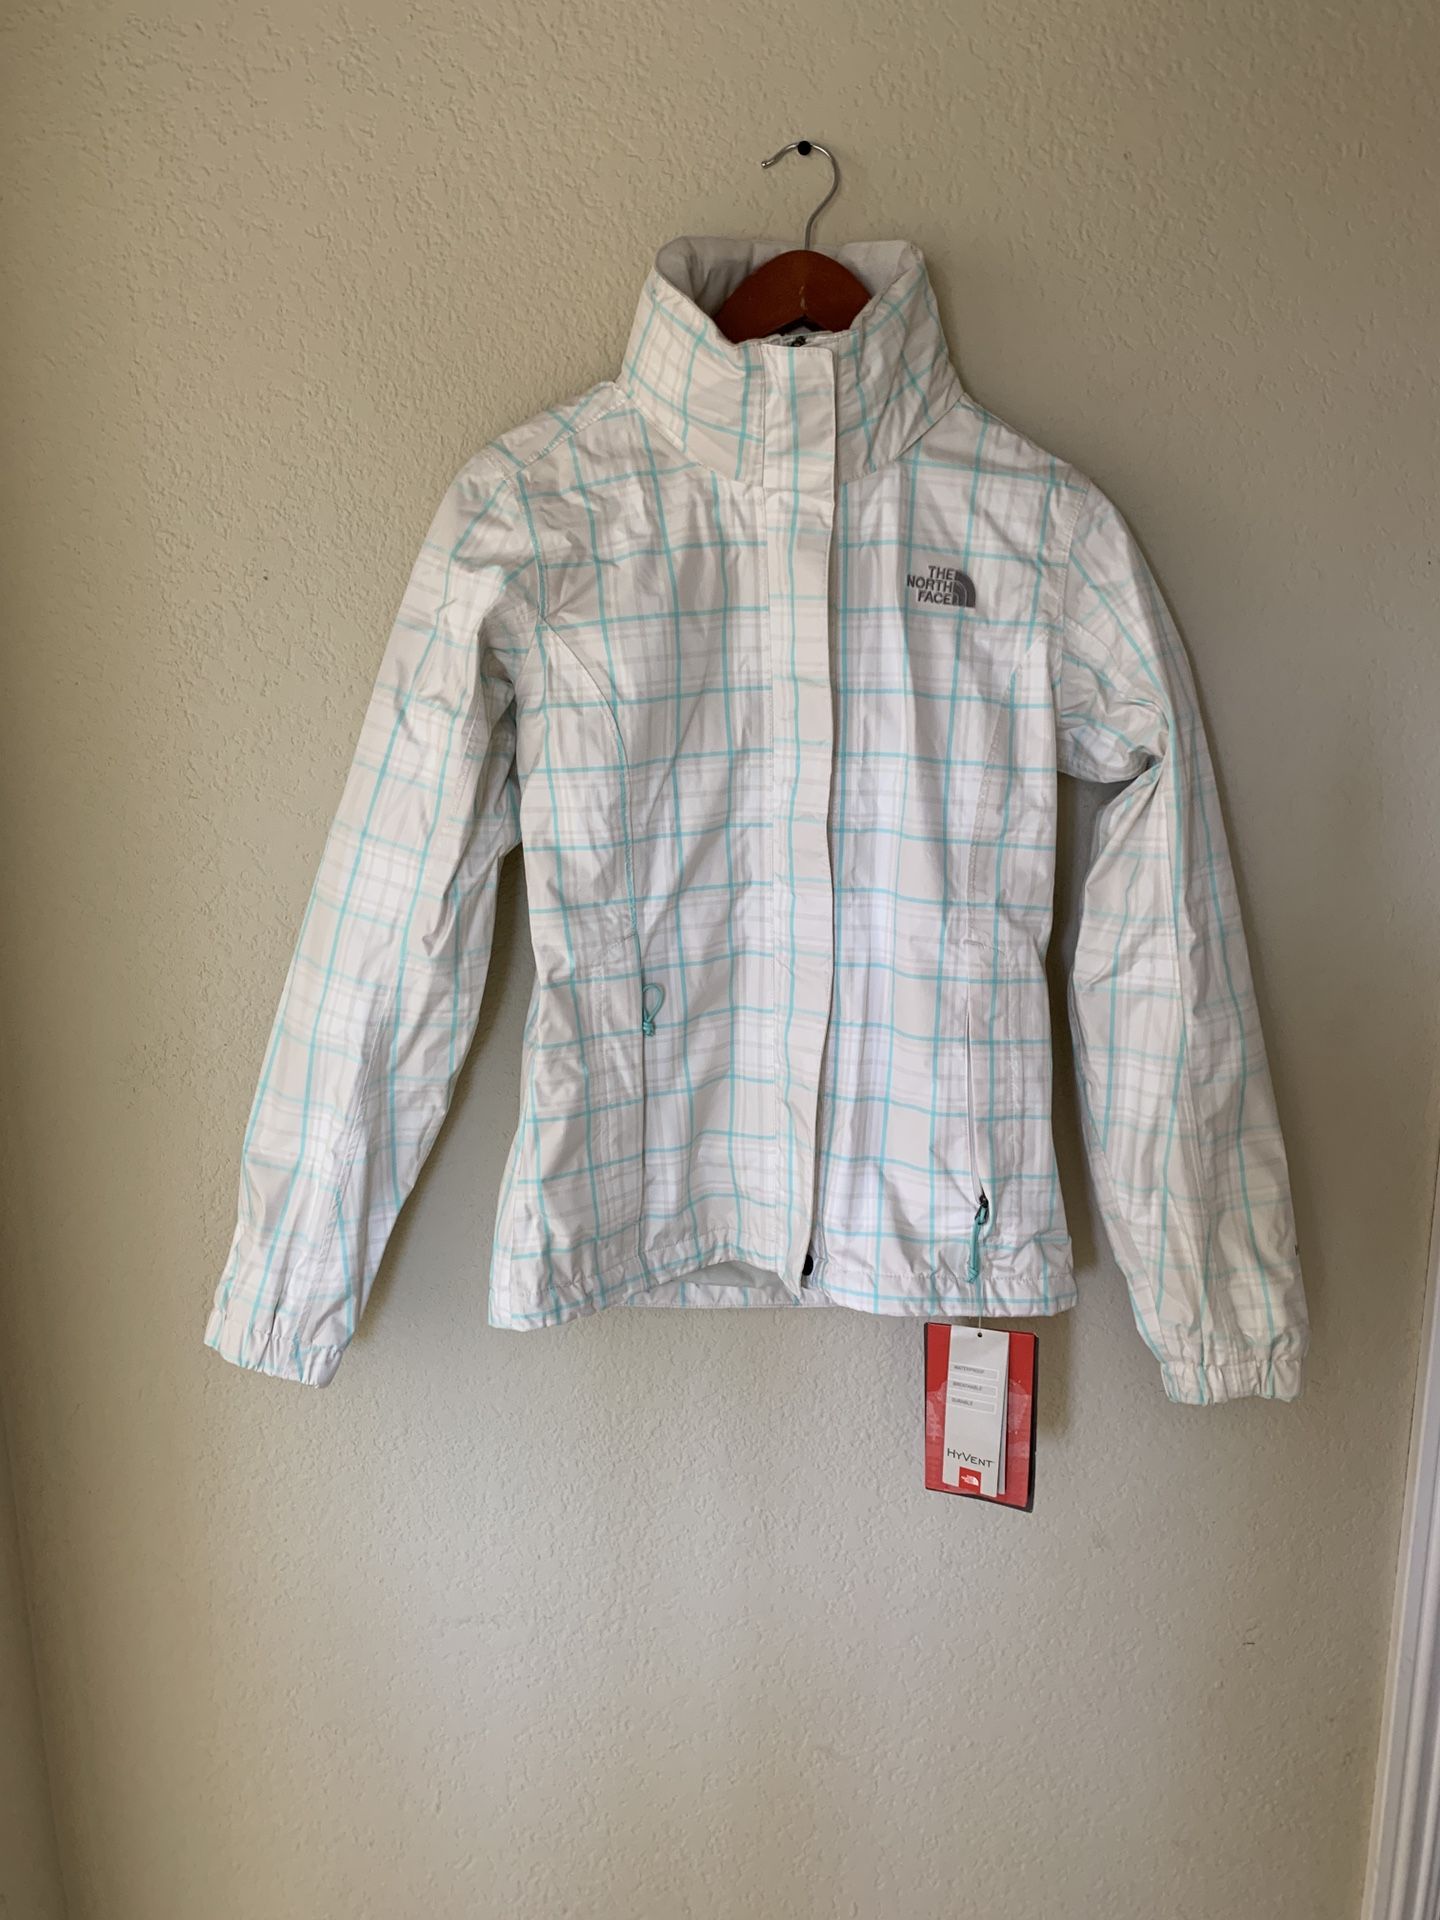 The North Face HyVent Jacket NWT! Size XS